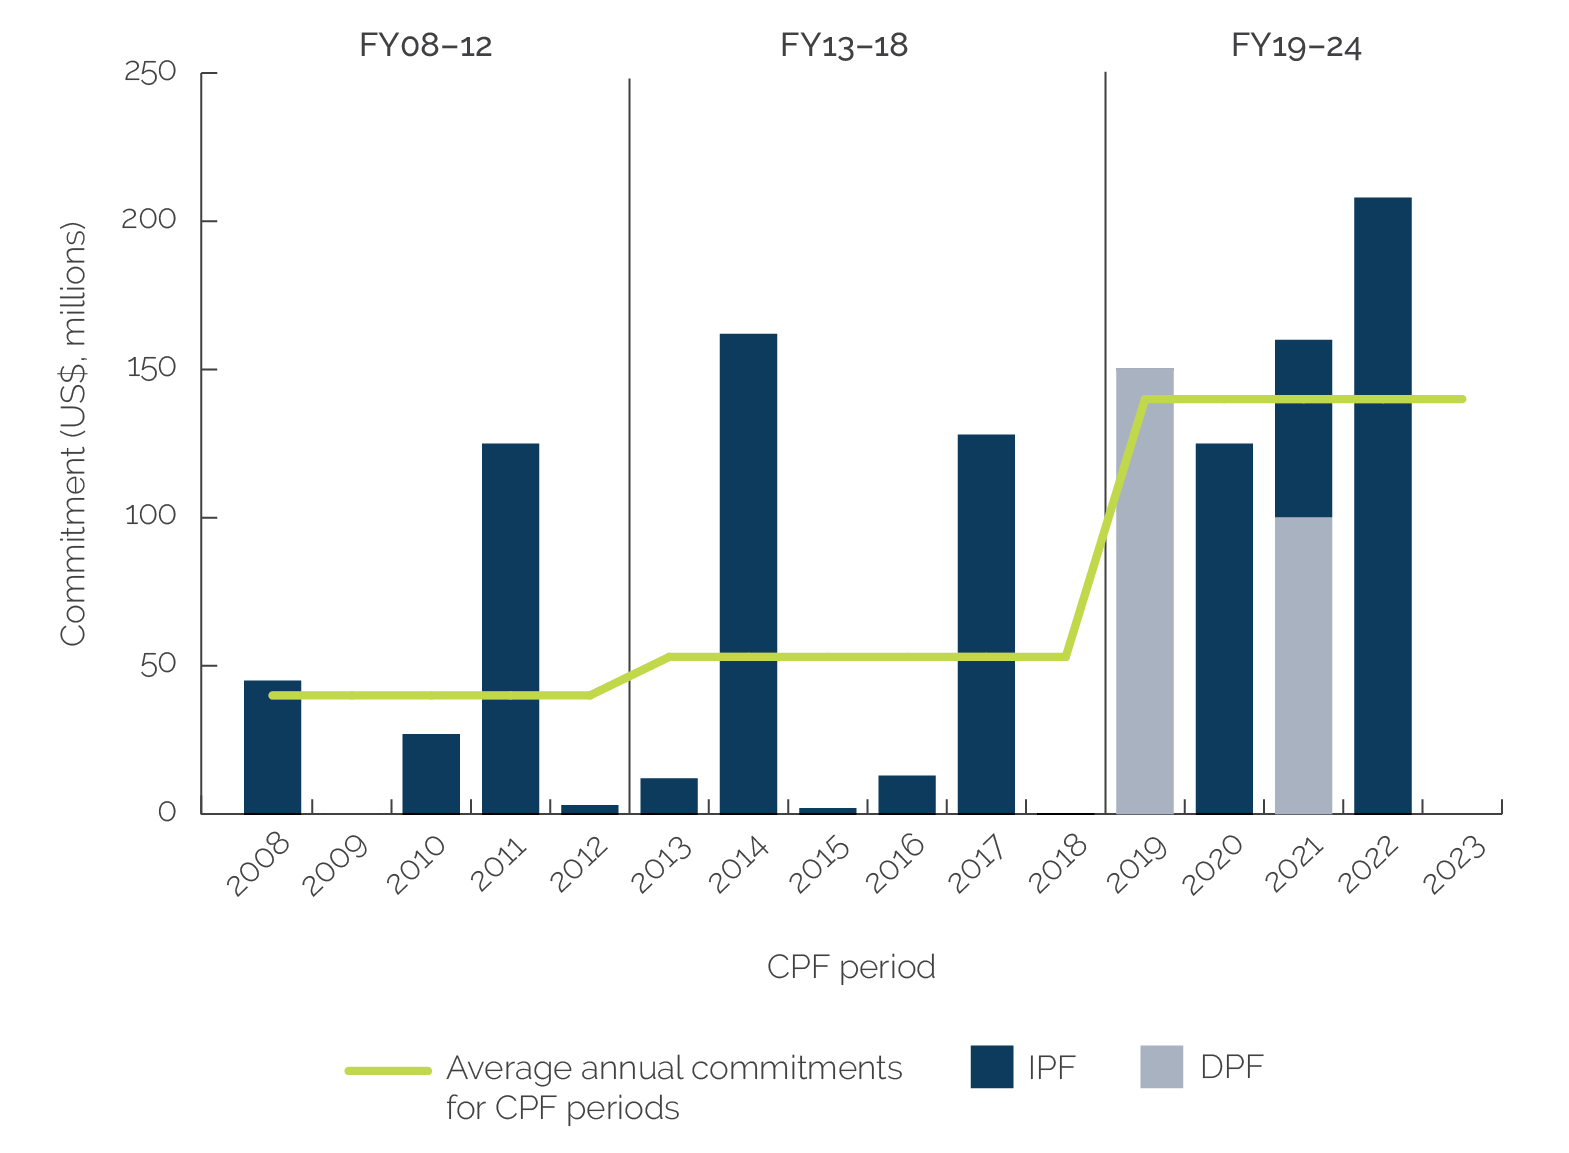 A time-series stacked bar chart shows commitments of I P Fs and D P Fs approved in each fiscal year during three C P F periods, with a mean value for each period. During the F Y 08–12 and F Y 13–18 C P F periods, commitments were only made through I P Fs, and the annual average commitments were around US$40 million for FY08-12 and around 50 million for FY13-18. The FY 19–23 C P F period introduced D P F lending, with US$150 million committed in 2019 and $US100 million in 2021.